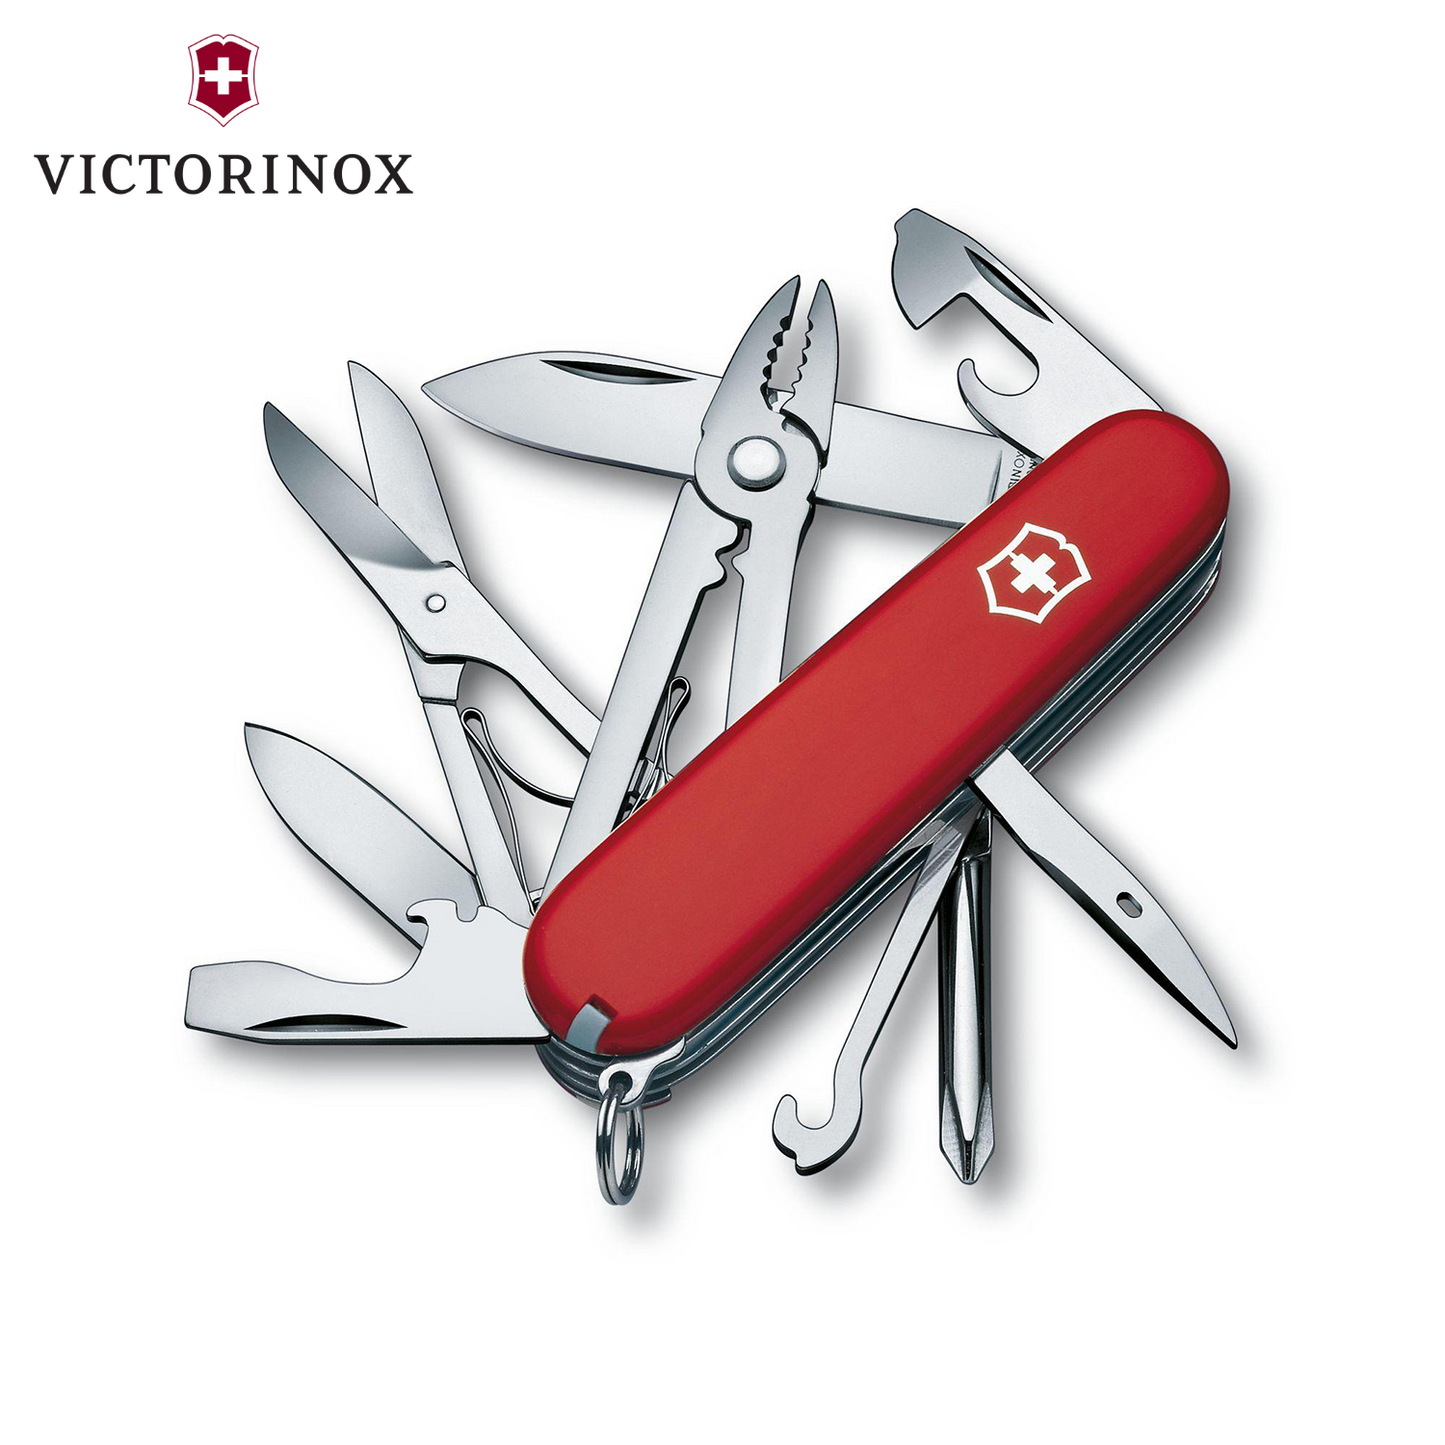 Victorinox Deluxe Tinker: The Essential Multitool for Travelers